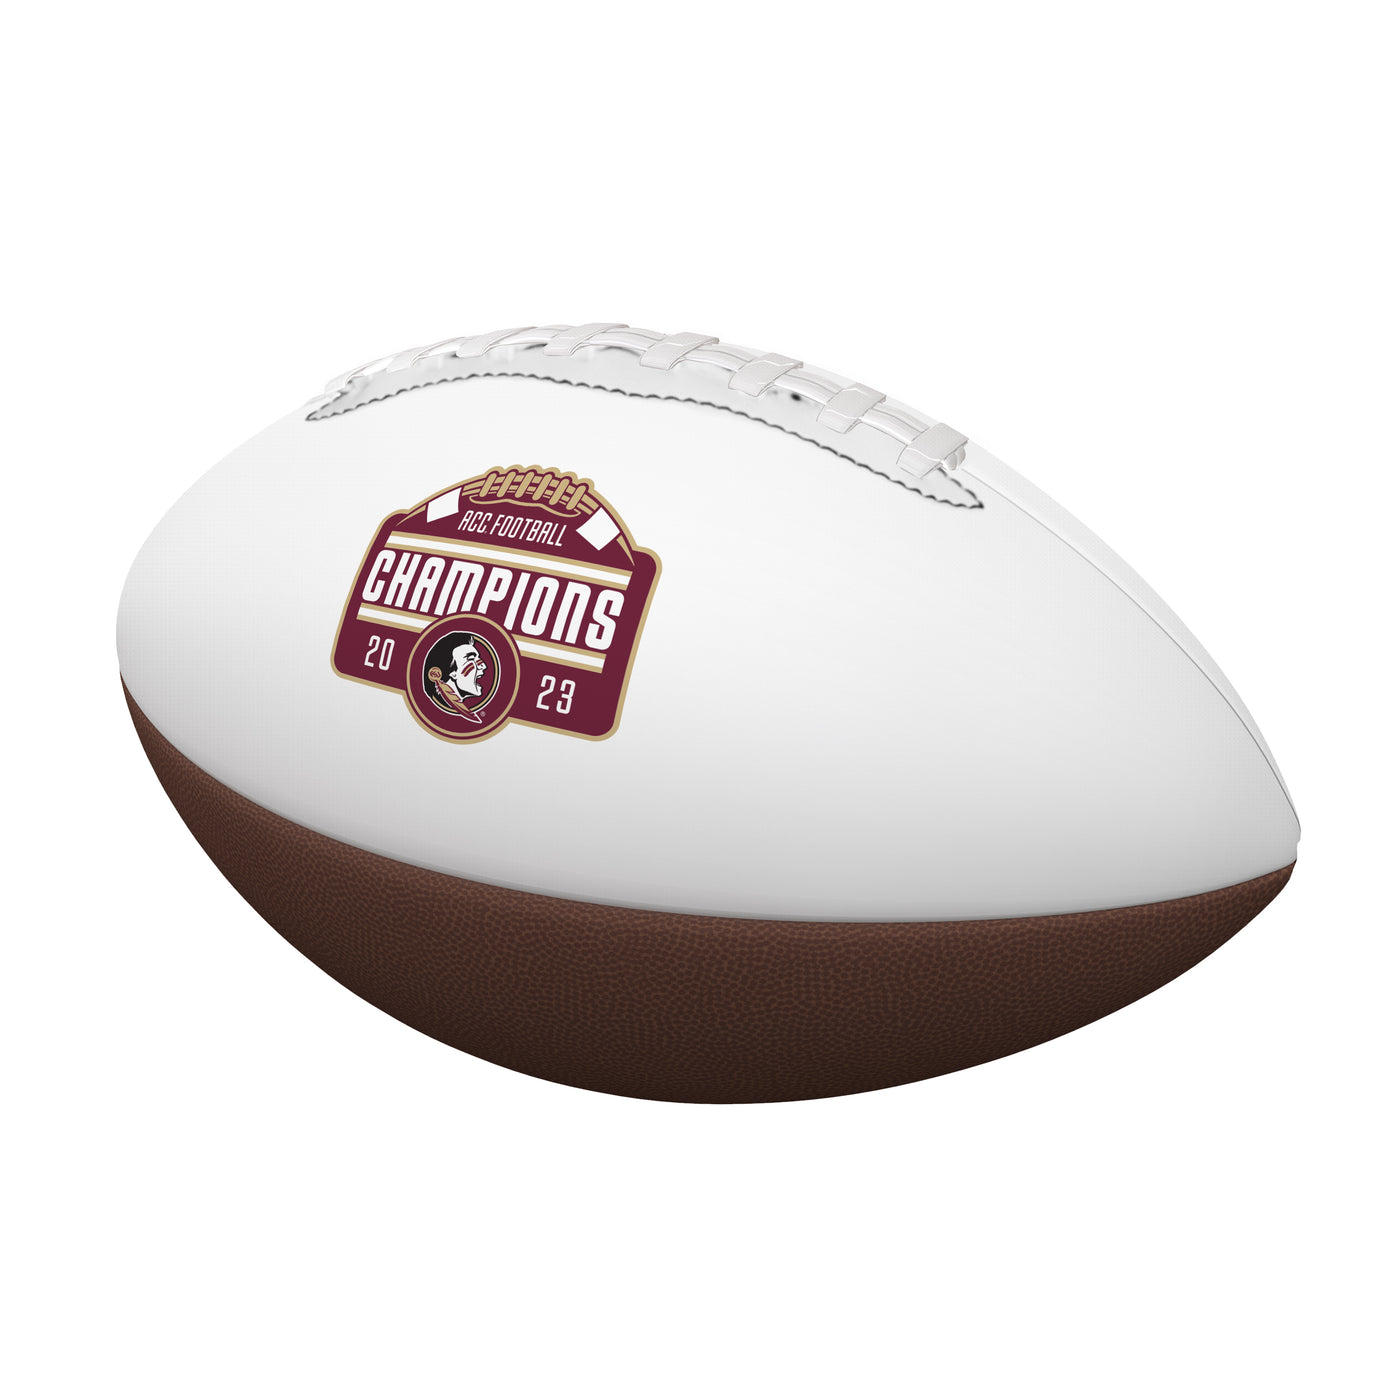 Florida State 2023 ACC Champions Full Size Autograph Football